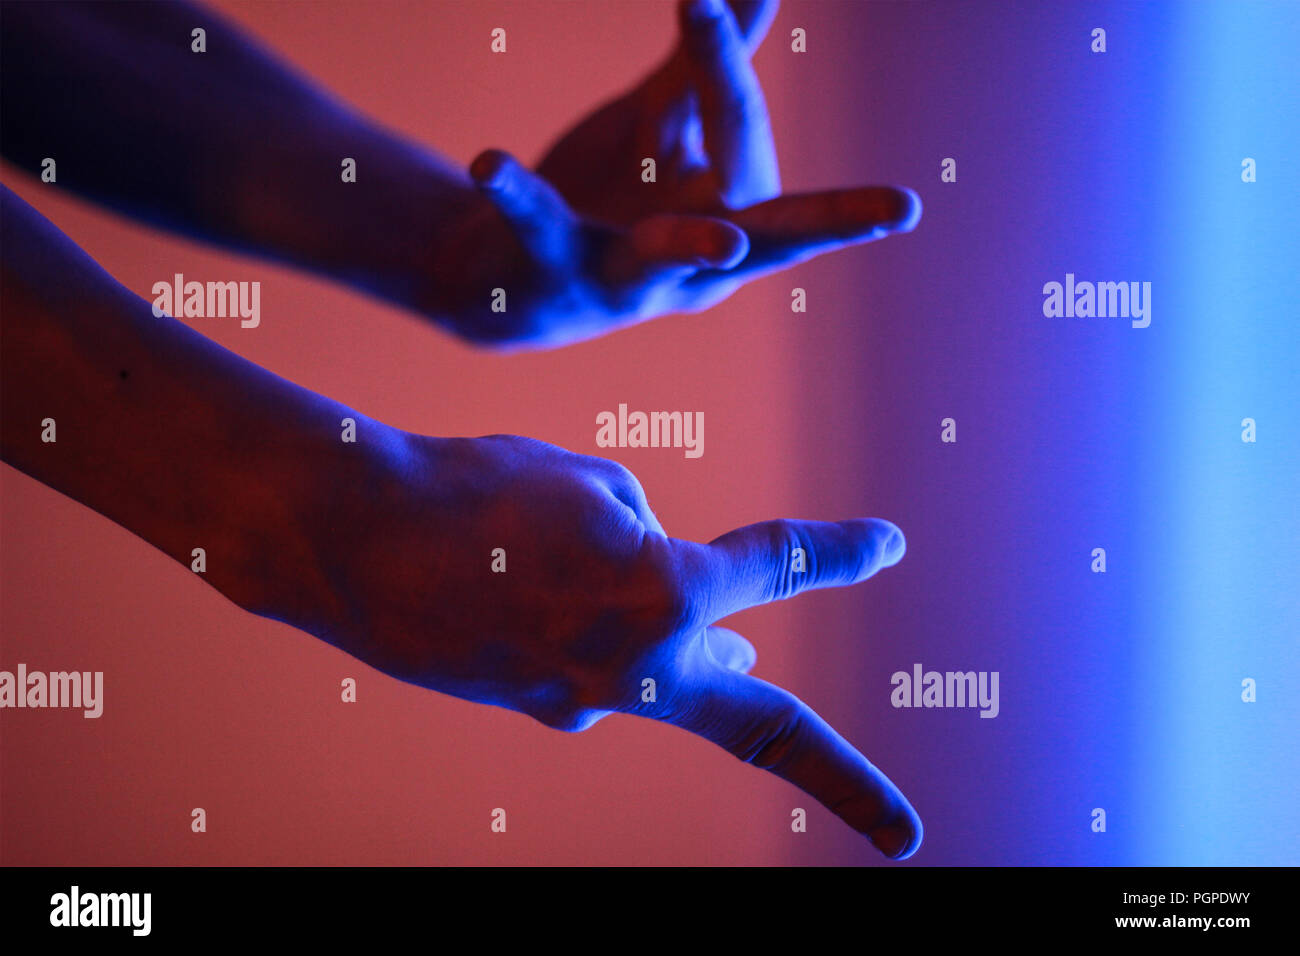 Human hands in red and blue color neon fluorescent light Stock Photo